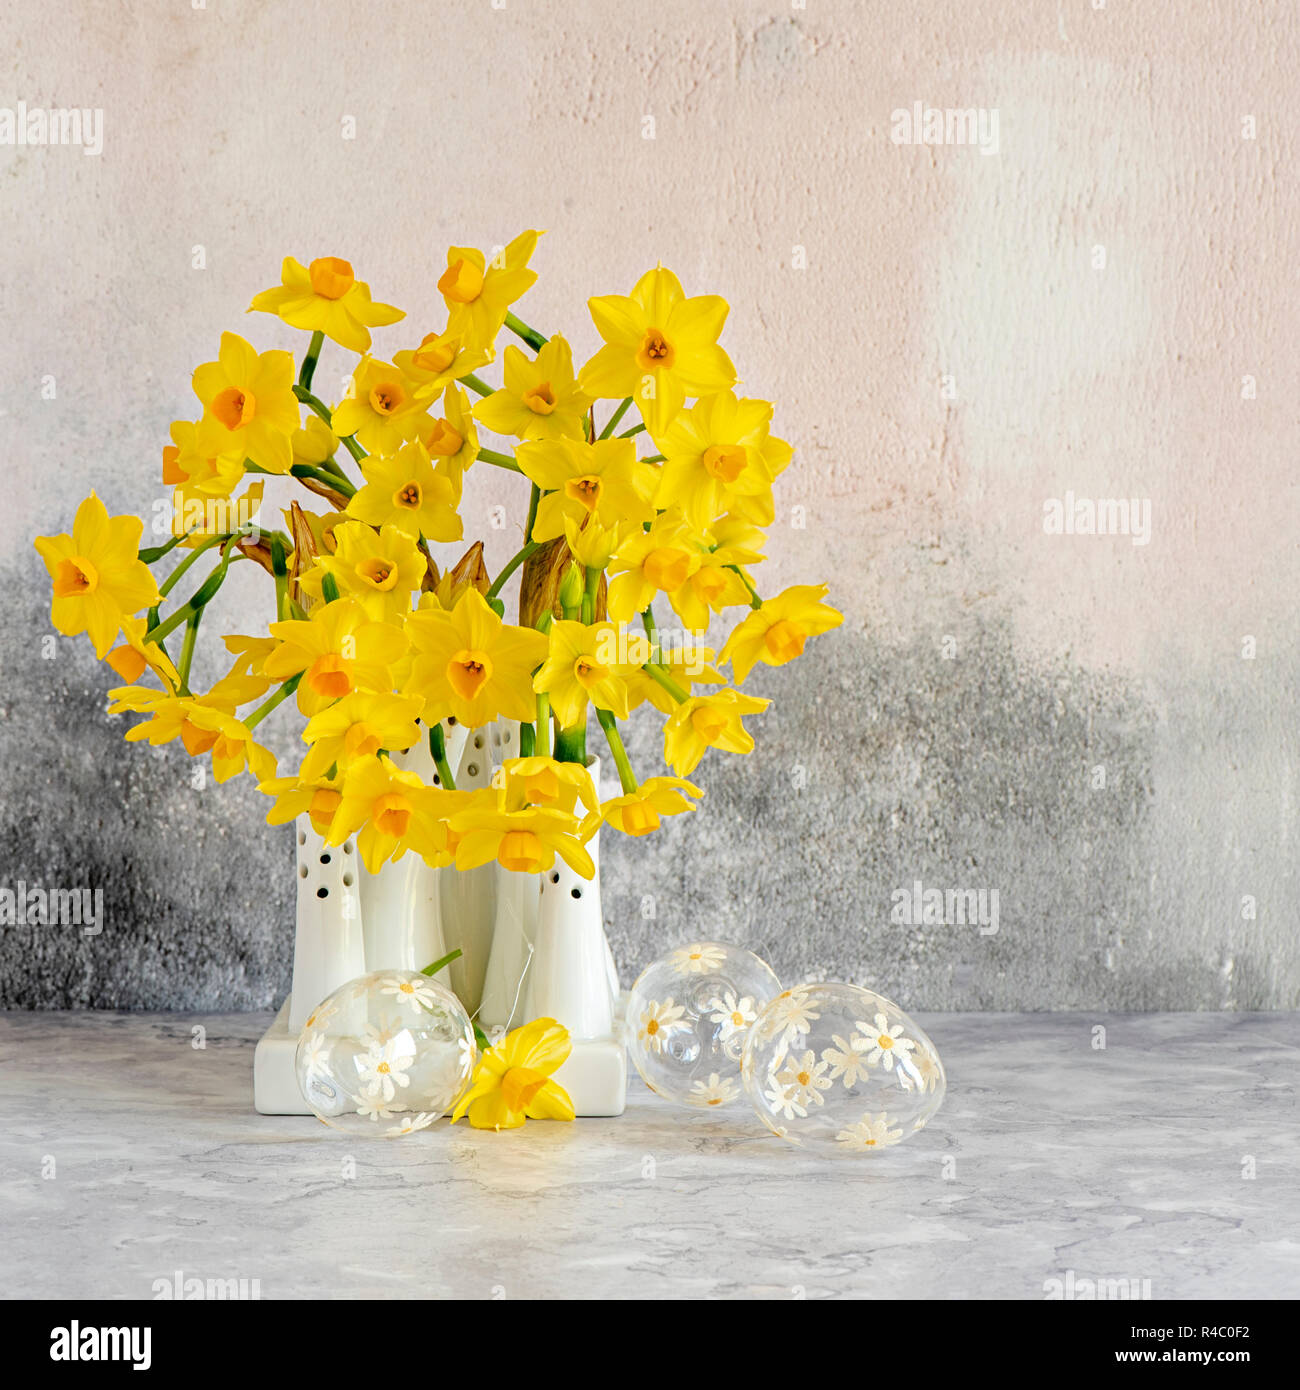 Close-up, still-life image of the beautiful spring flowers of Narcissus 'Tete-a-Tete' a dwarf Daffodil. cut flowers in white porcelain vases Stock Photo